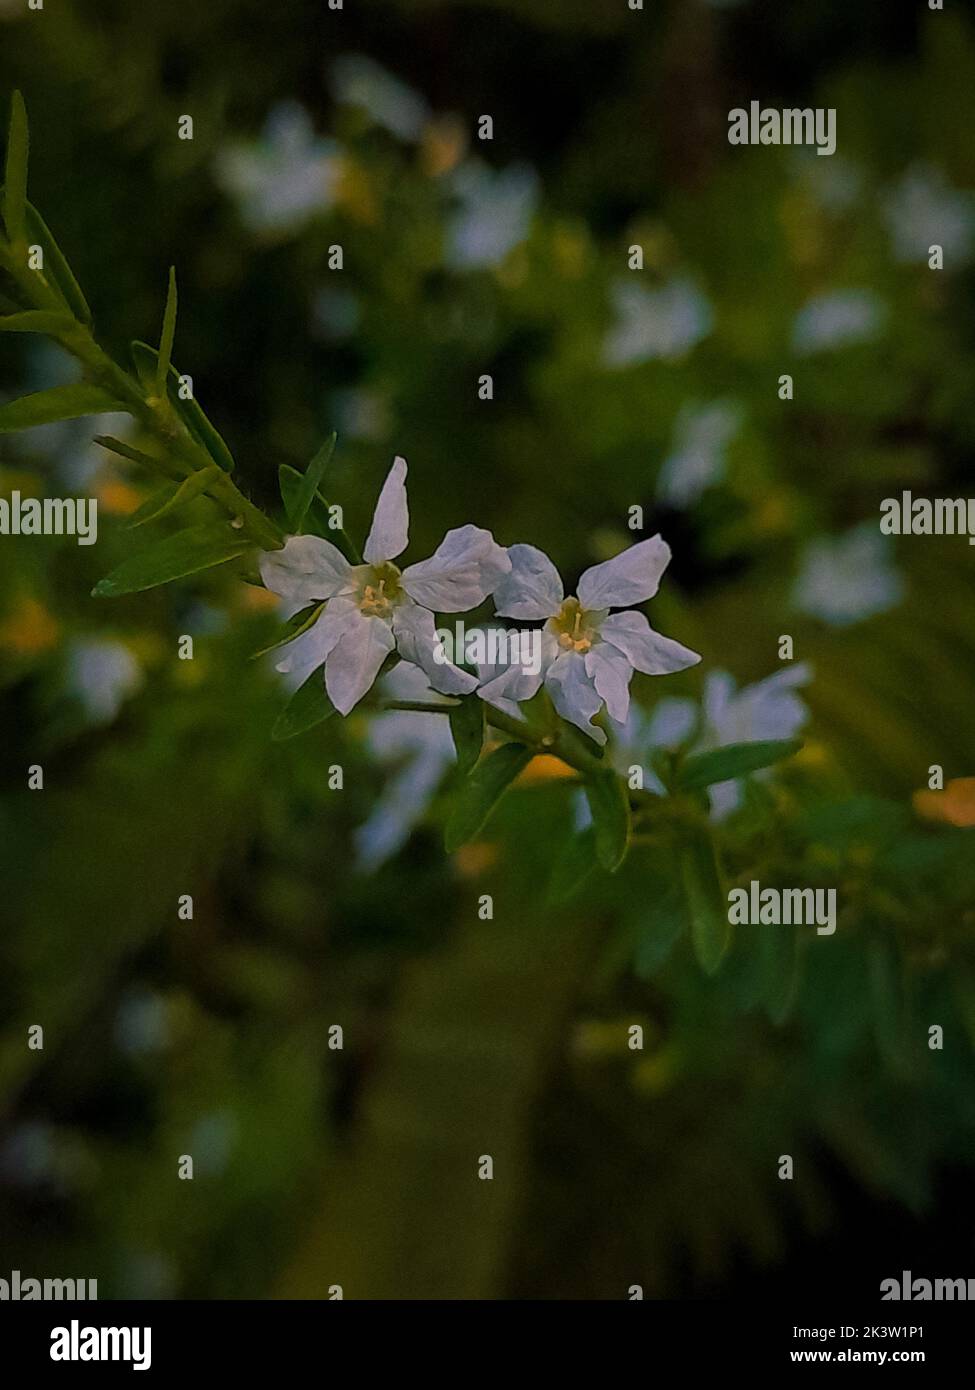 A selective focus shot of blooming white false heather (Cuphea hyssopifolia) flowers on blurry background Stock Photo